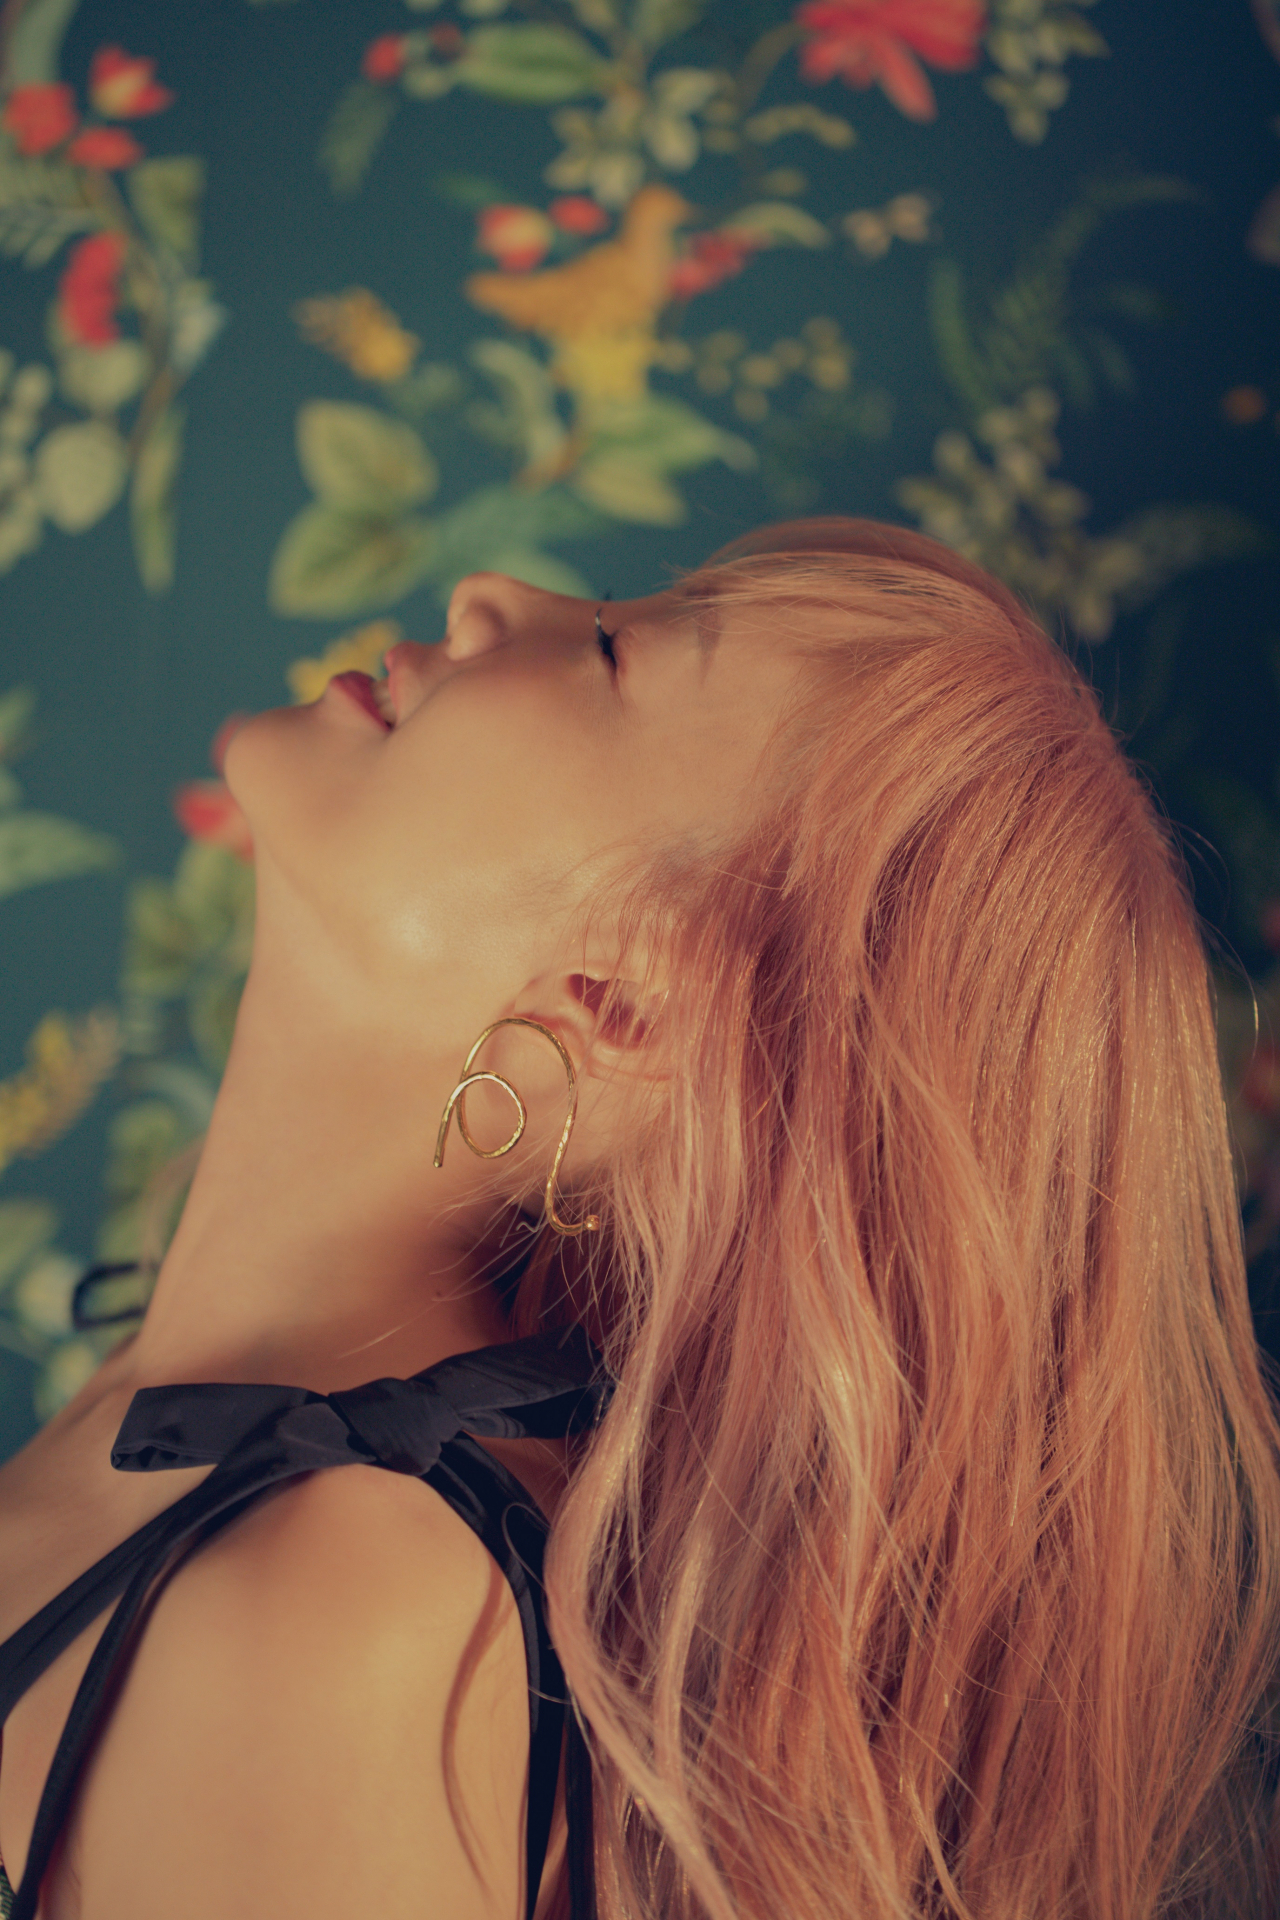 Singer Byul's concept pictures for her sixth LP